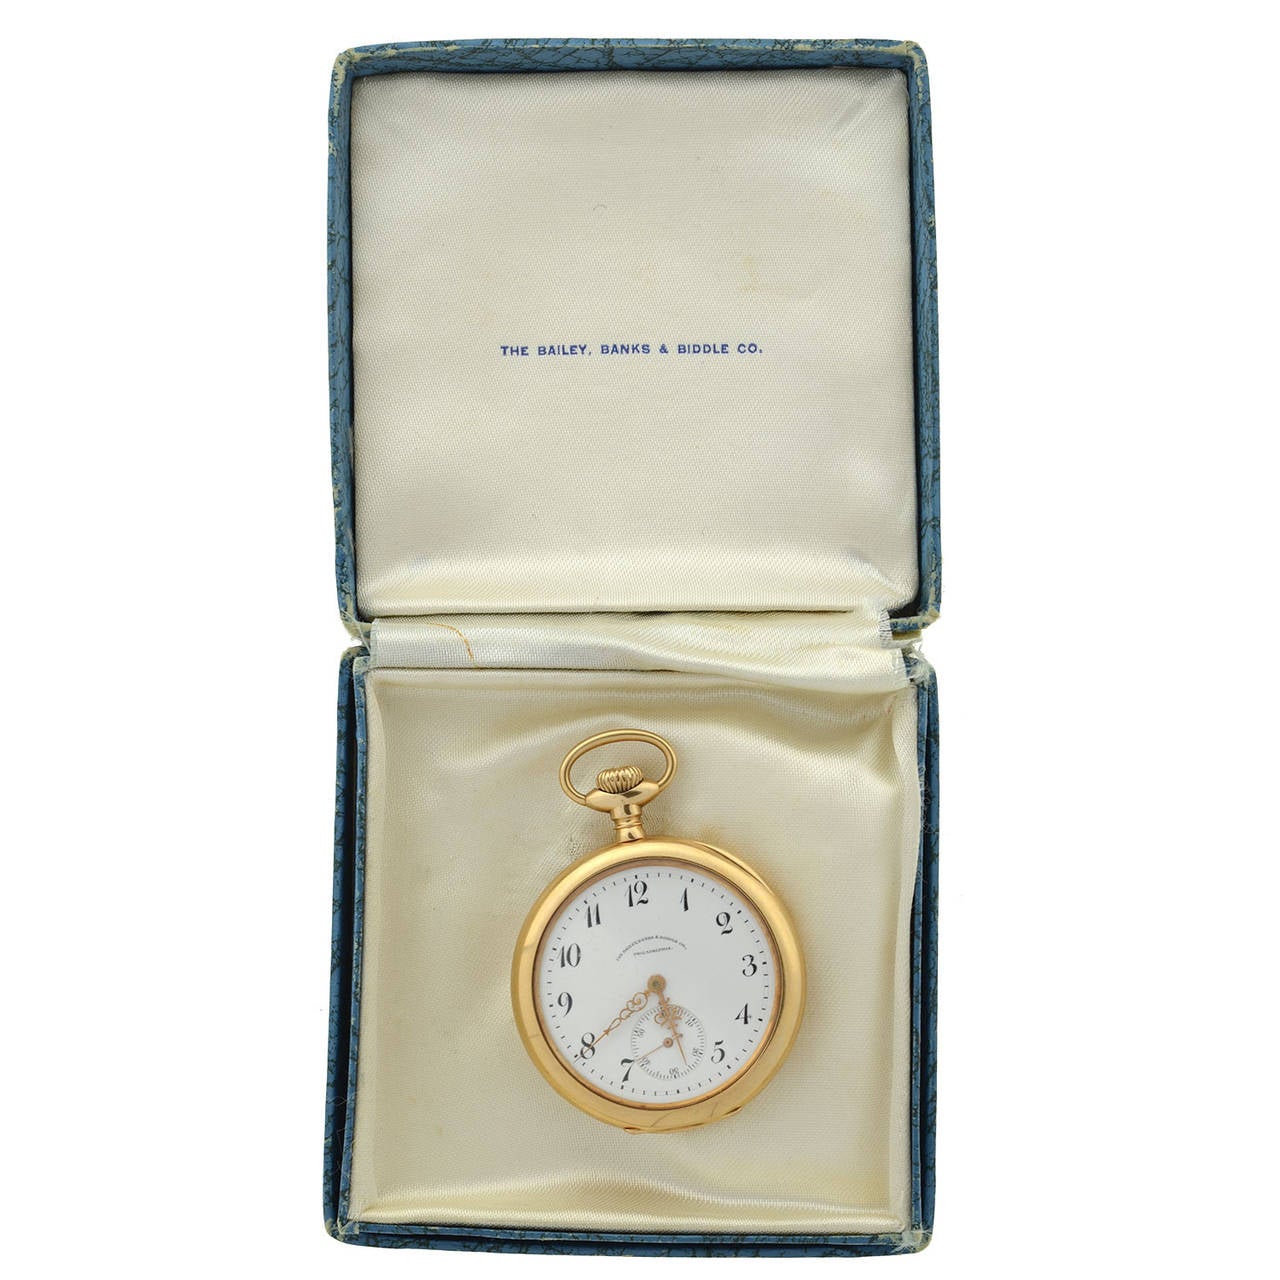 Edwardian Waltham Yellow Gold Pocket Watch Retailed by Bailey, Banks & Biddle circa 1904 For Sale